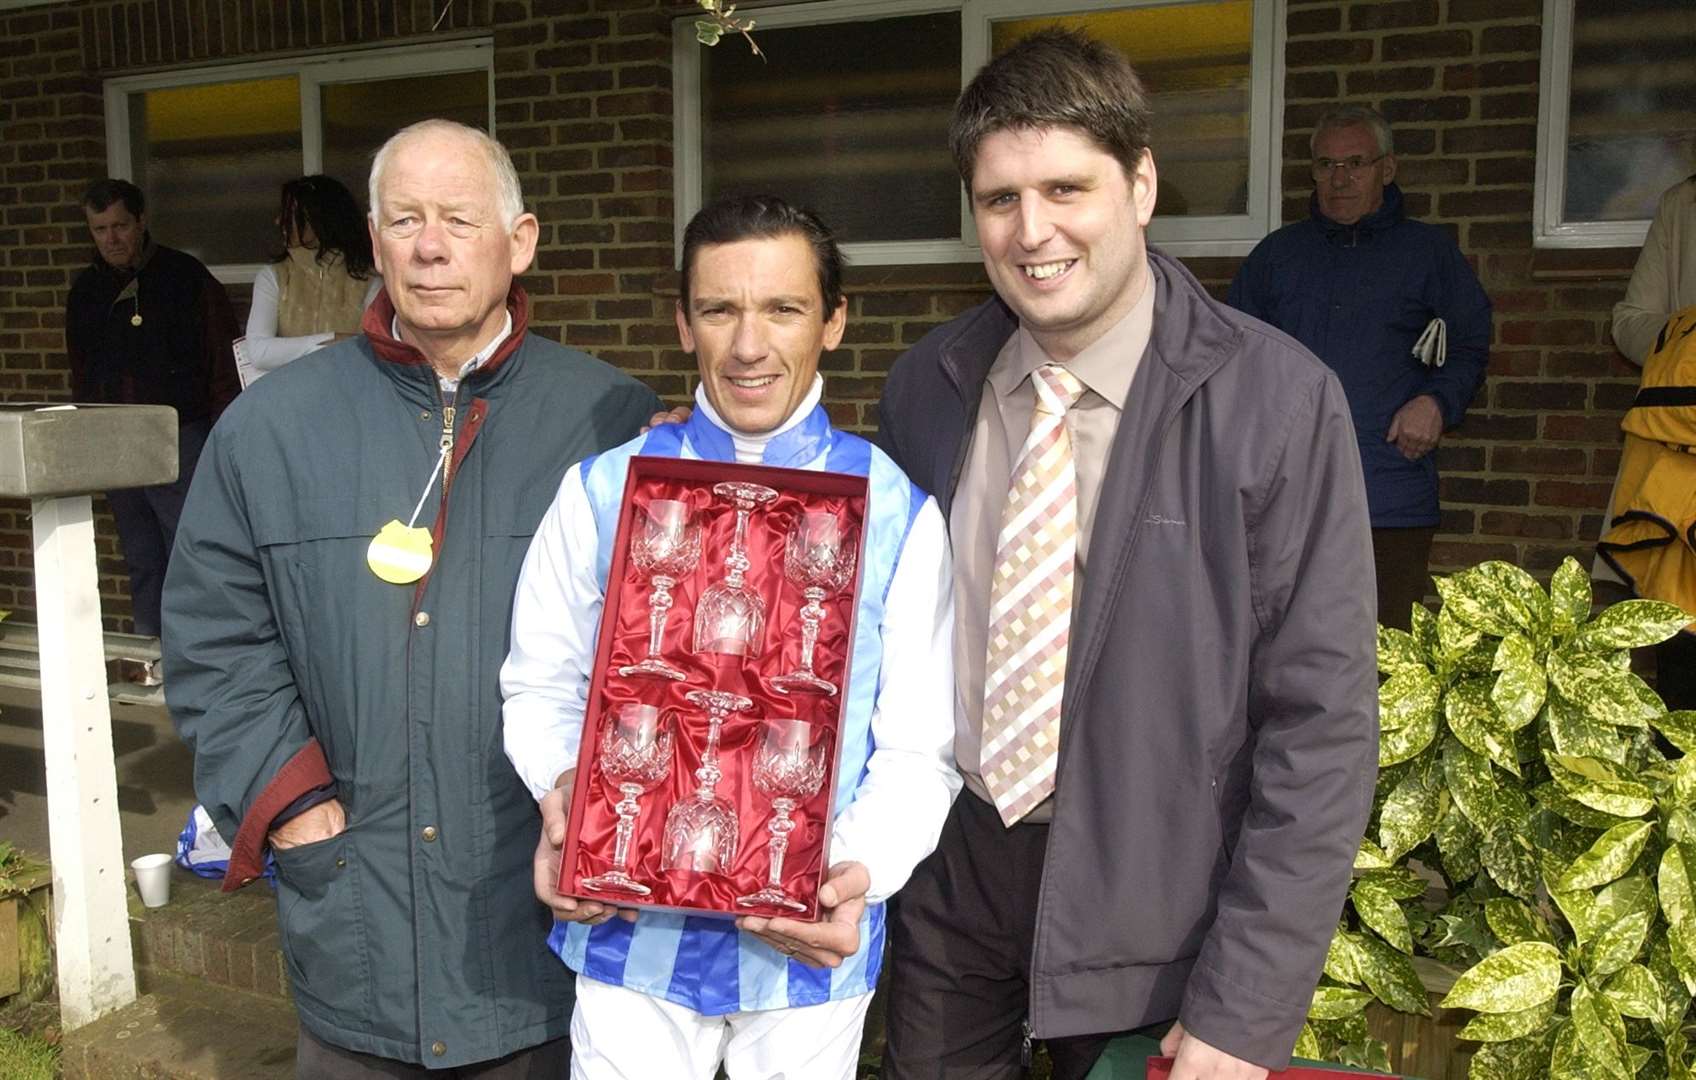 Former Kentish Express editor Leo Whitlock with winning jockey Frankie Dettori and Barry Court, representing the winning owners, in April 2005